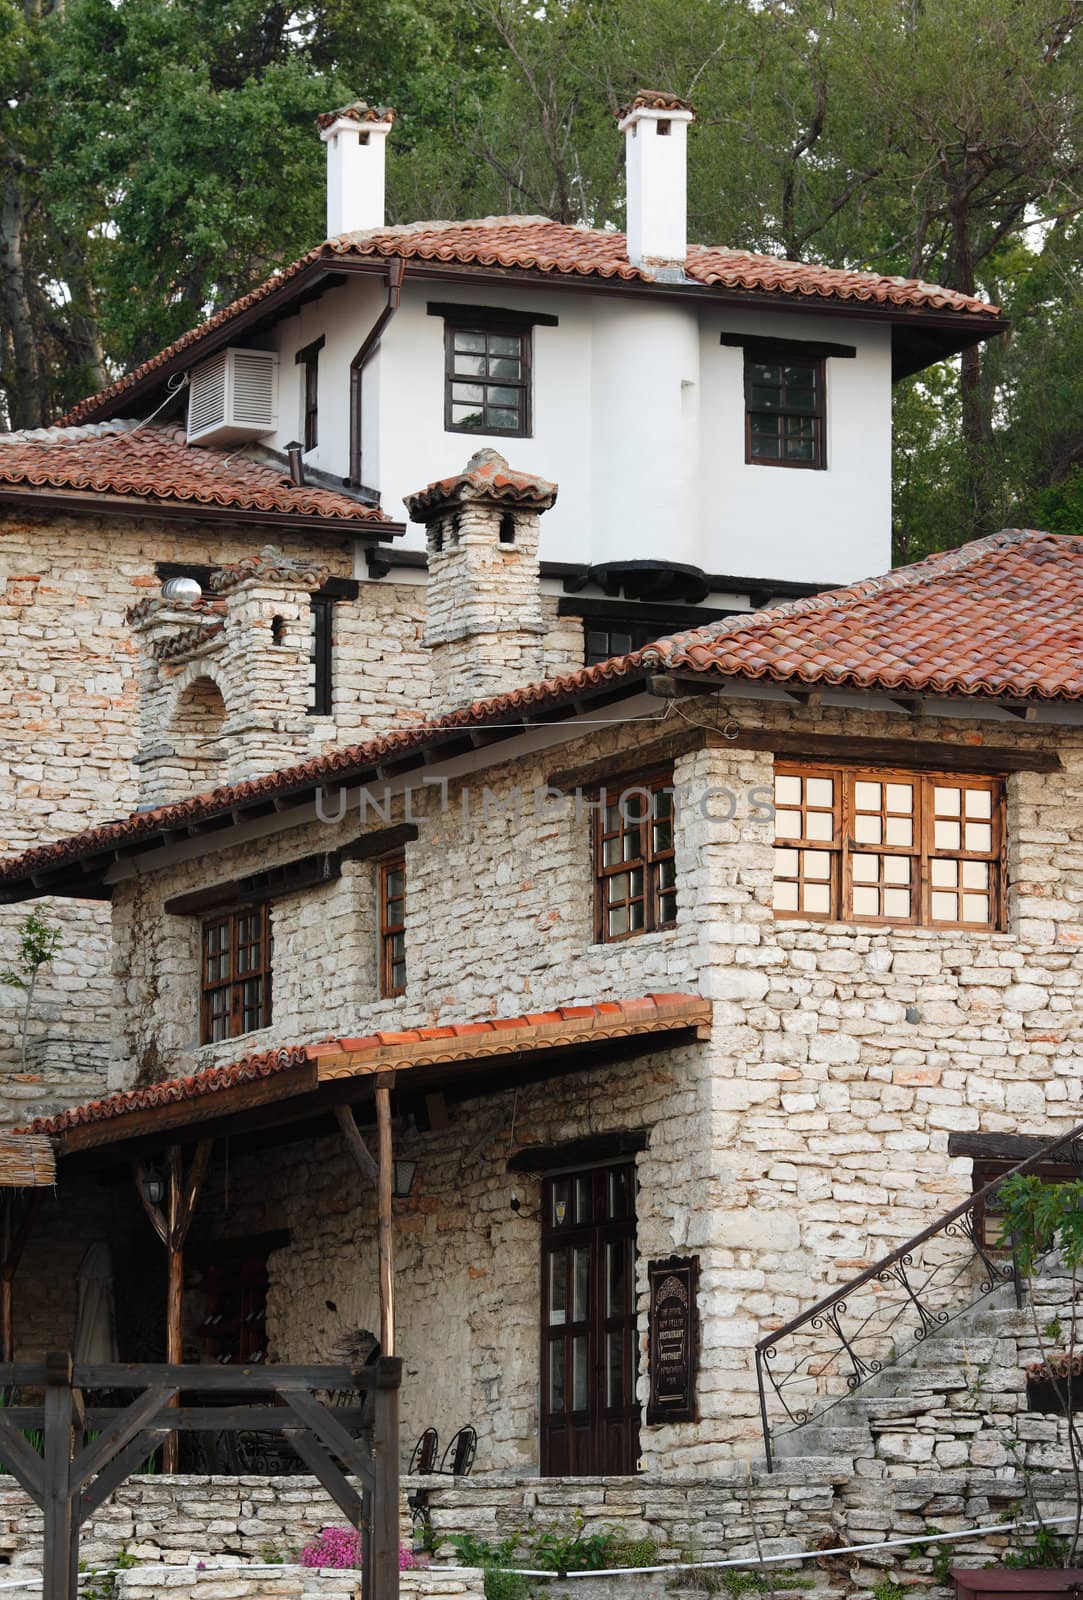 Balchik, old style architecture by ecobo